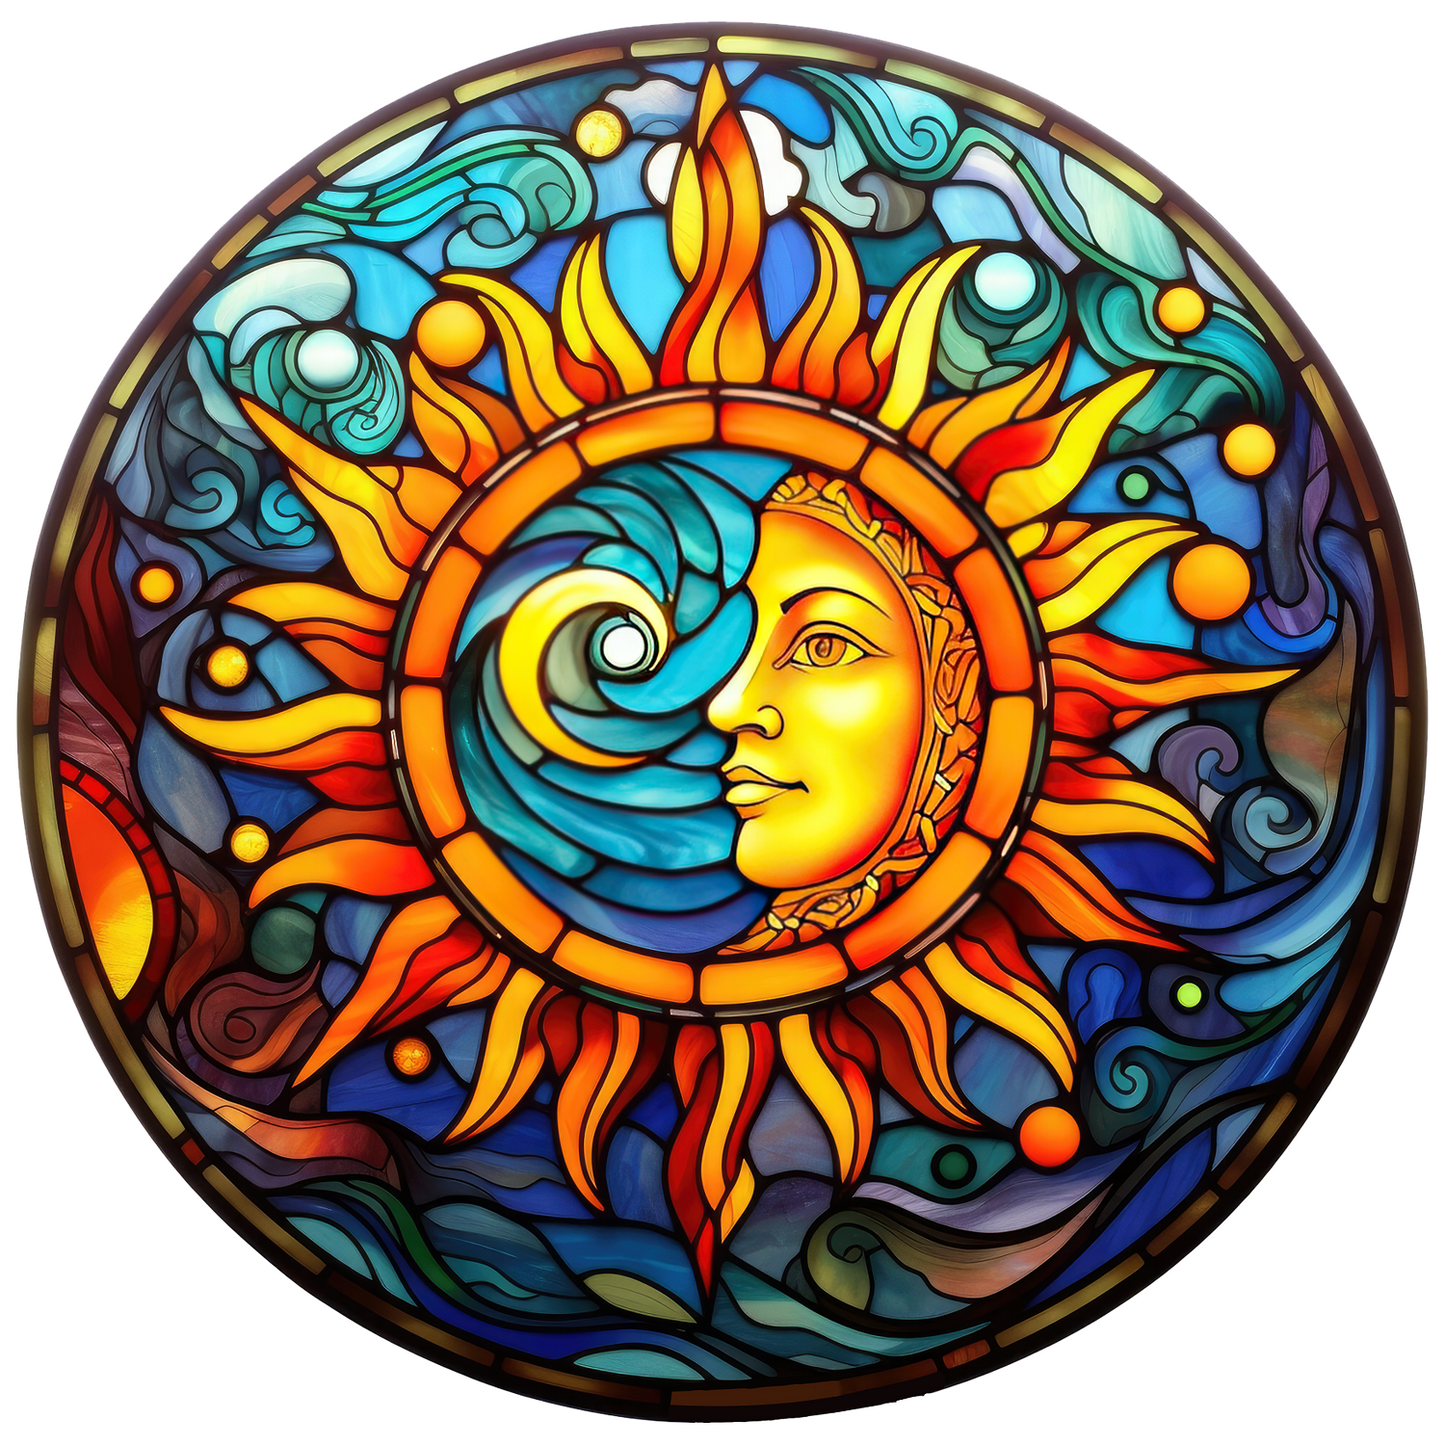 Beautiful Celestial Sun and Moon Stained Glass Stickers / Window Clings